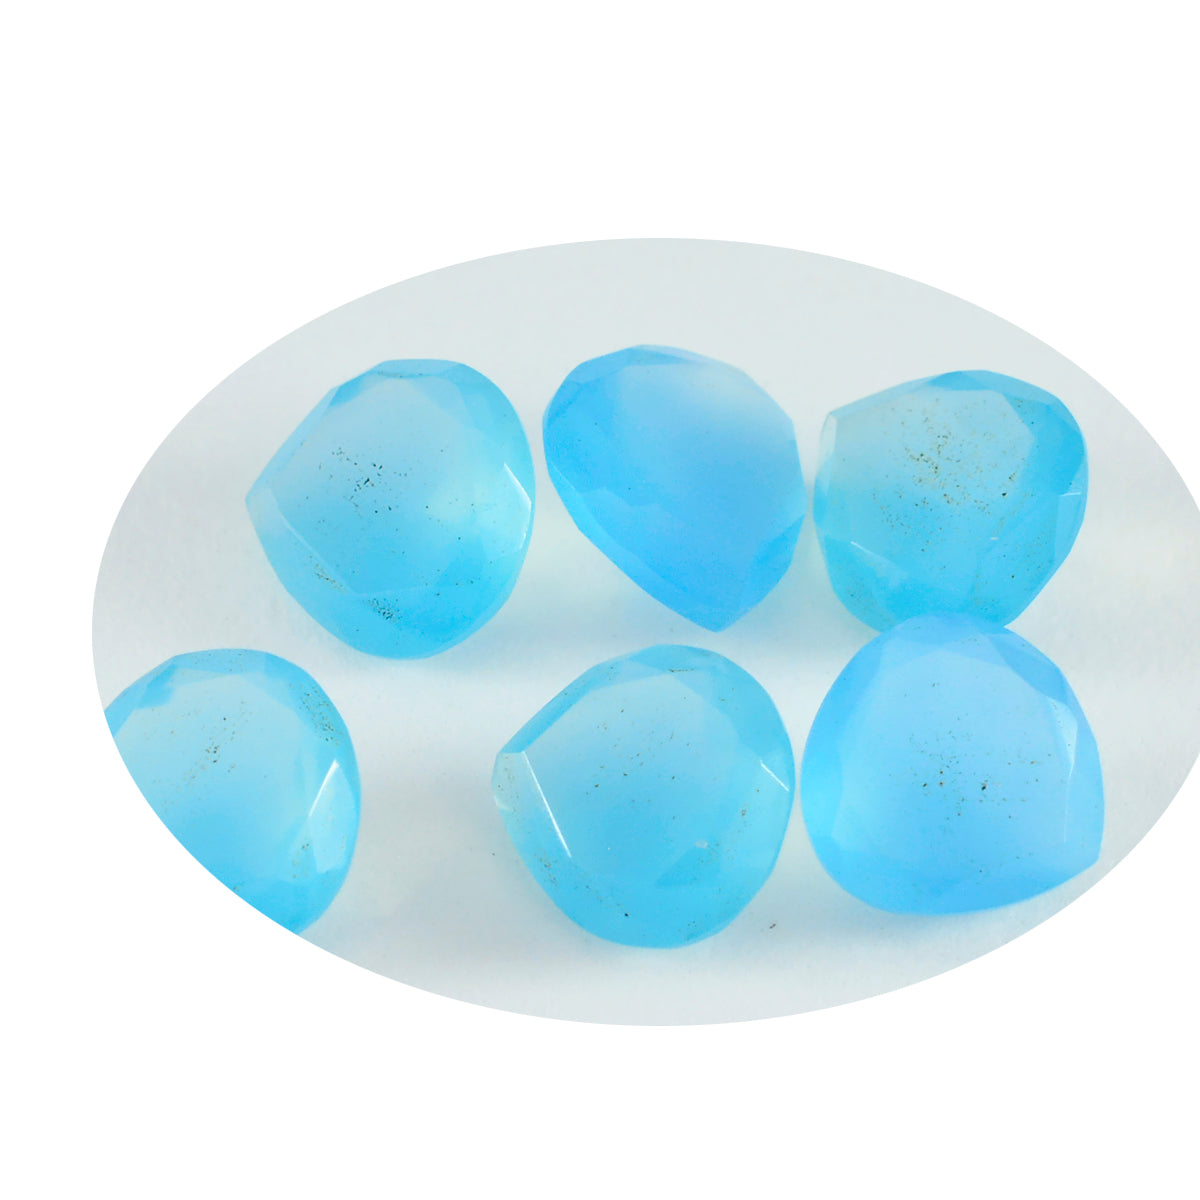 Riyogems 1PC Natural Aqua Chalcedony Faceted 6x6 mm Heart Shape handsome Quality Stone